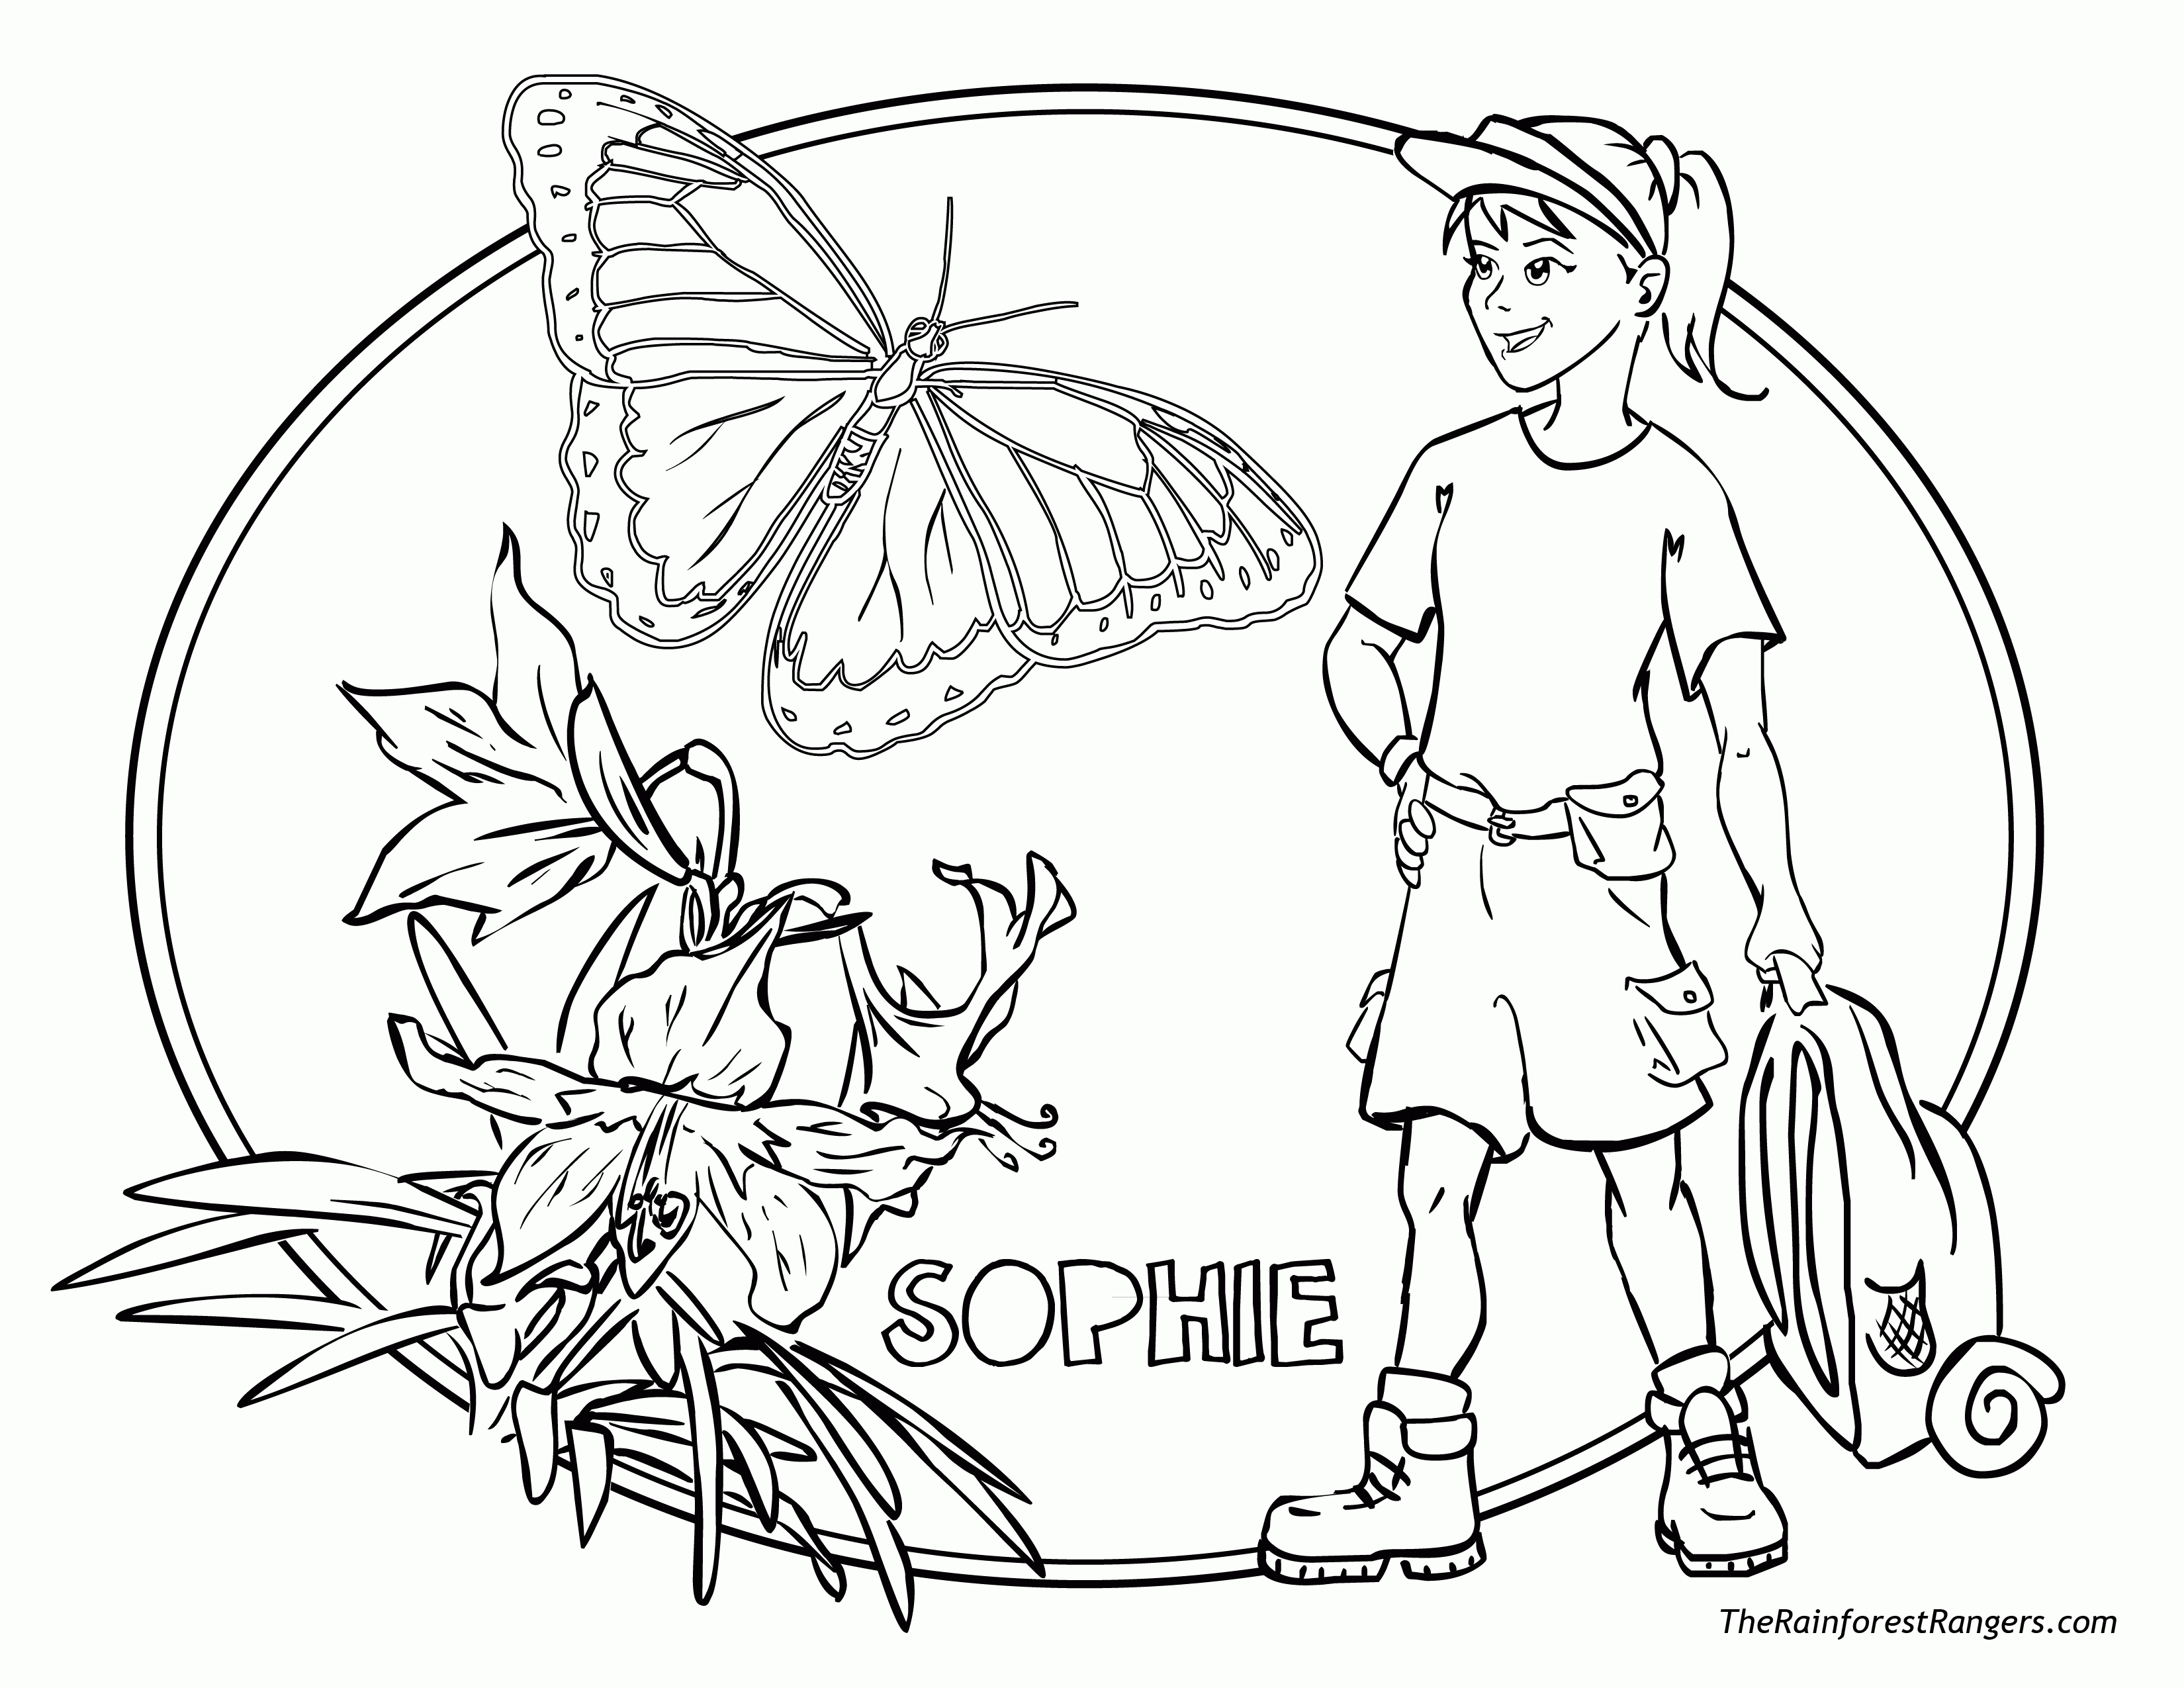 tropical rainforest coloring page layers of amazon rainforest coloring pages dukabooks rainforest page coloring tropical 